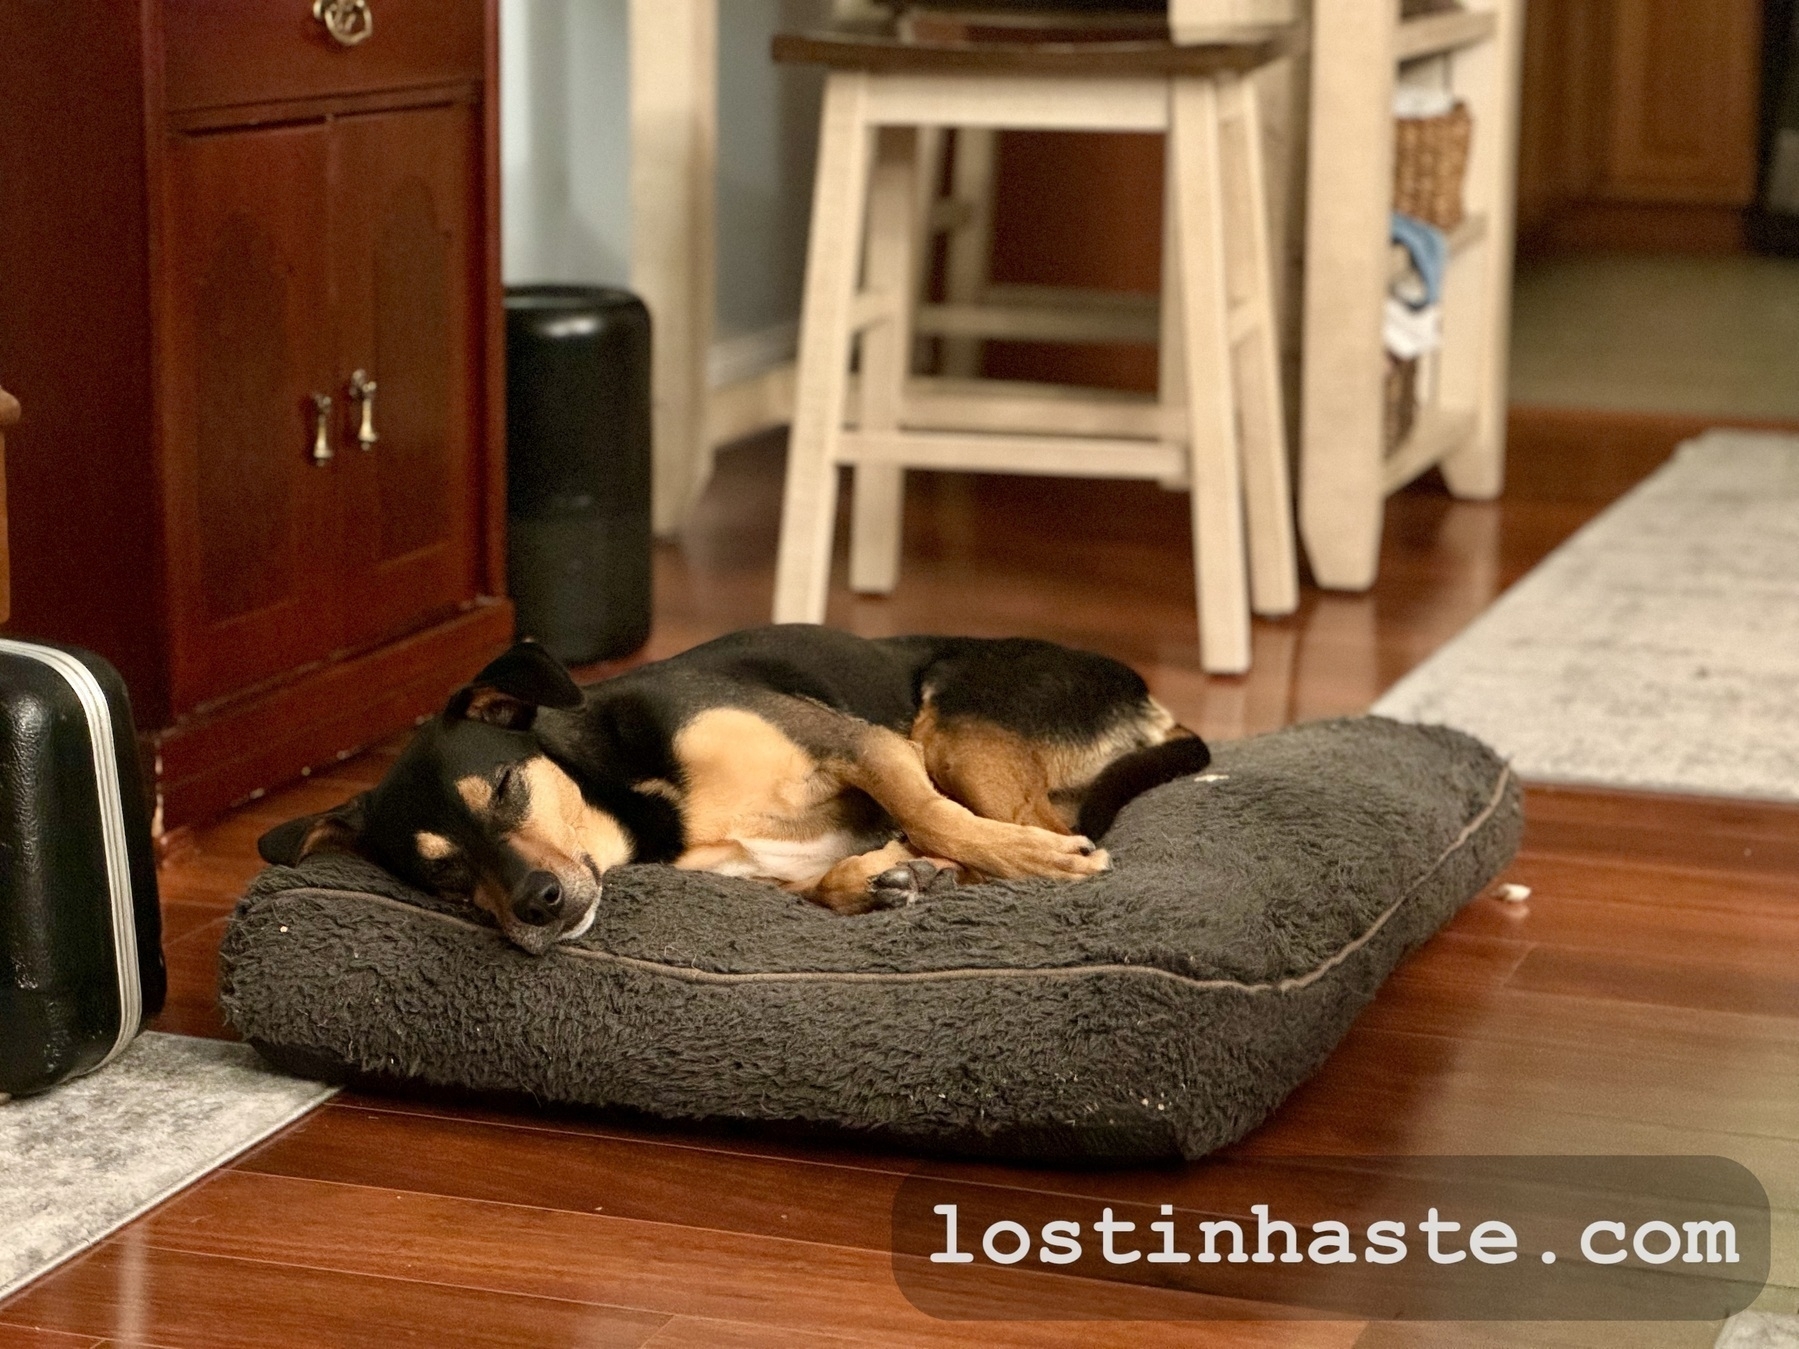 A dog is sleeping on a plush bed in a home interior, with furniture and a rug visible in the background. The text 'lostinhaste.com' is overlaid at the bottom right.